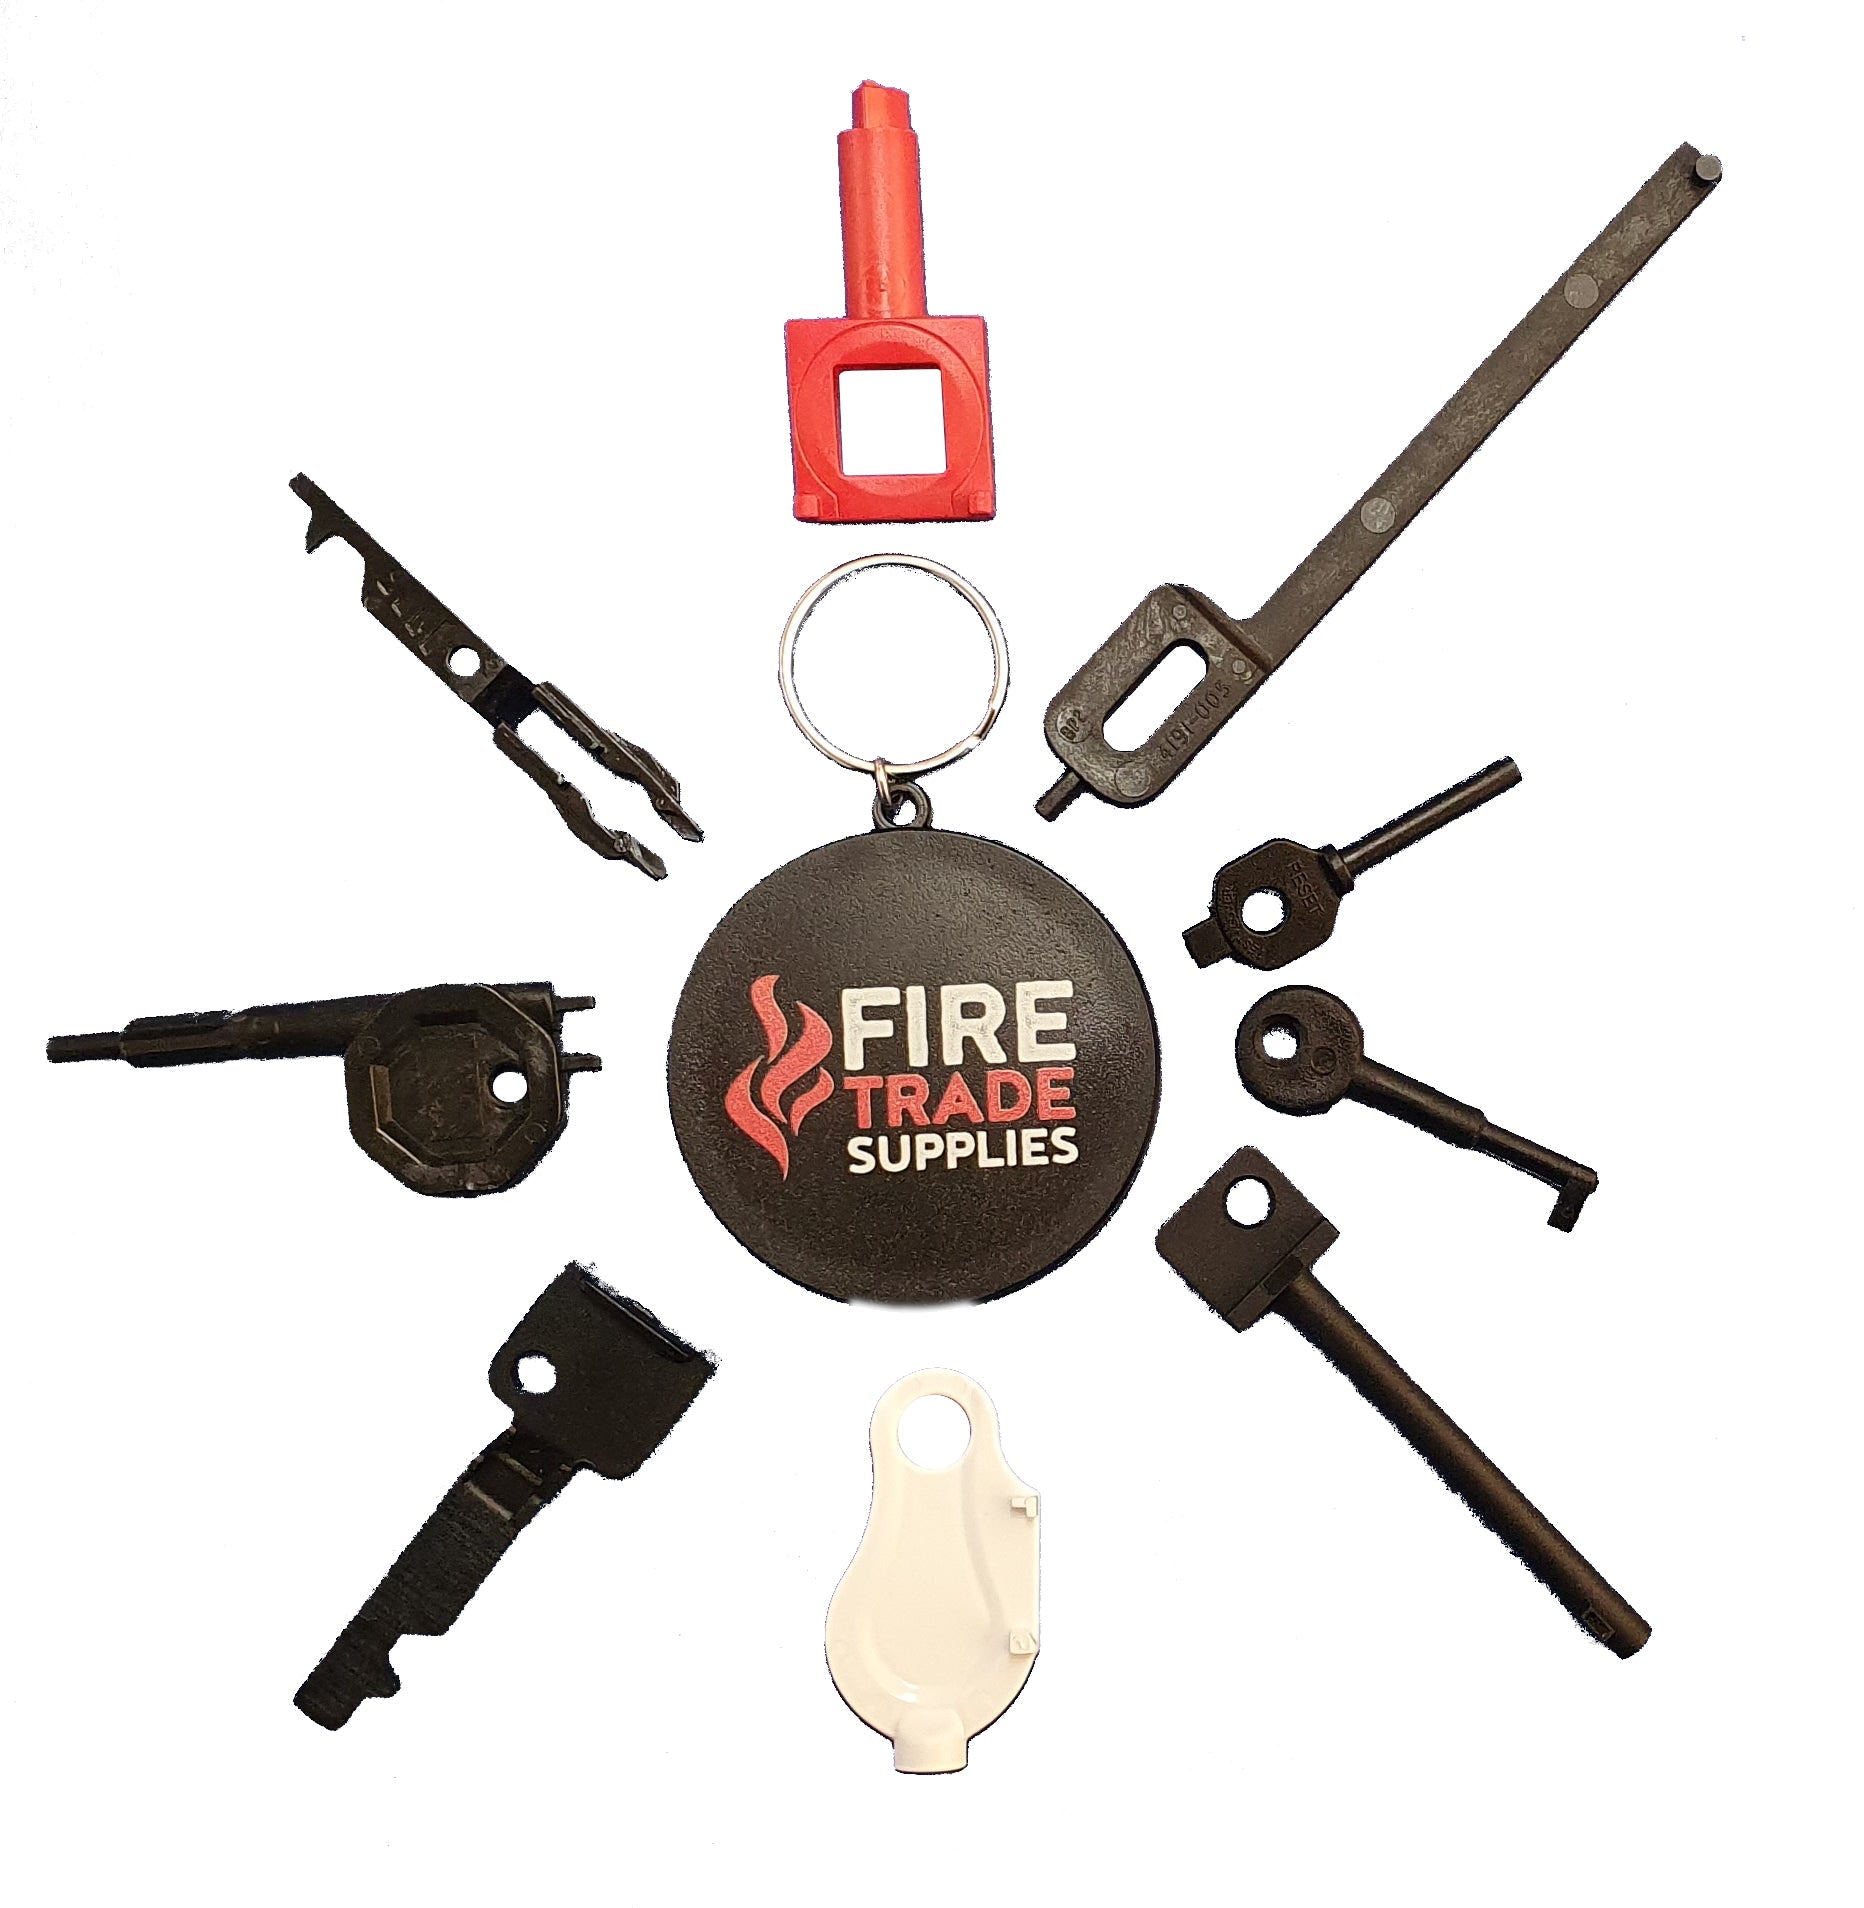 Engineer Manual Call Point Key Set - Fire Trade Supplies